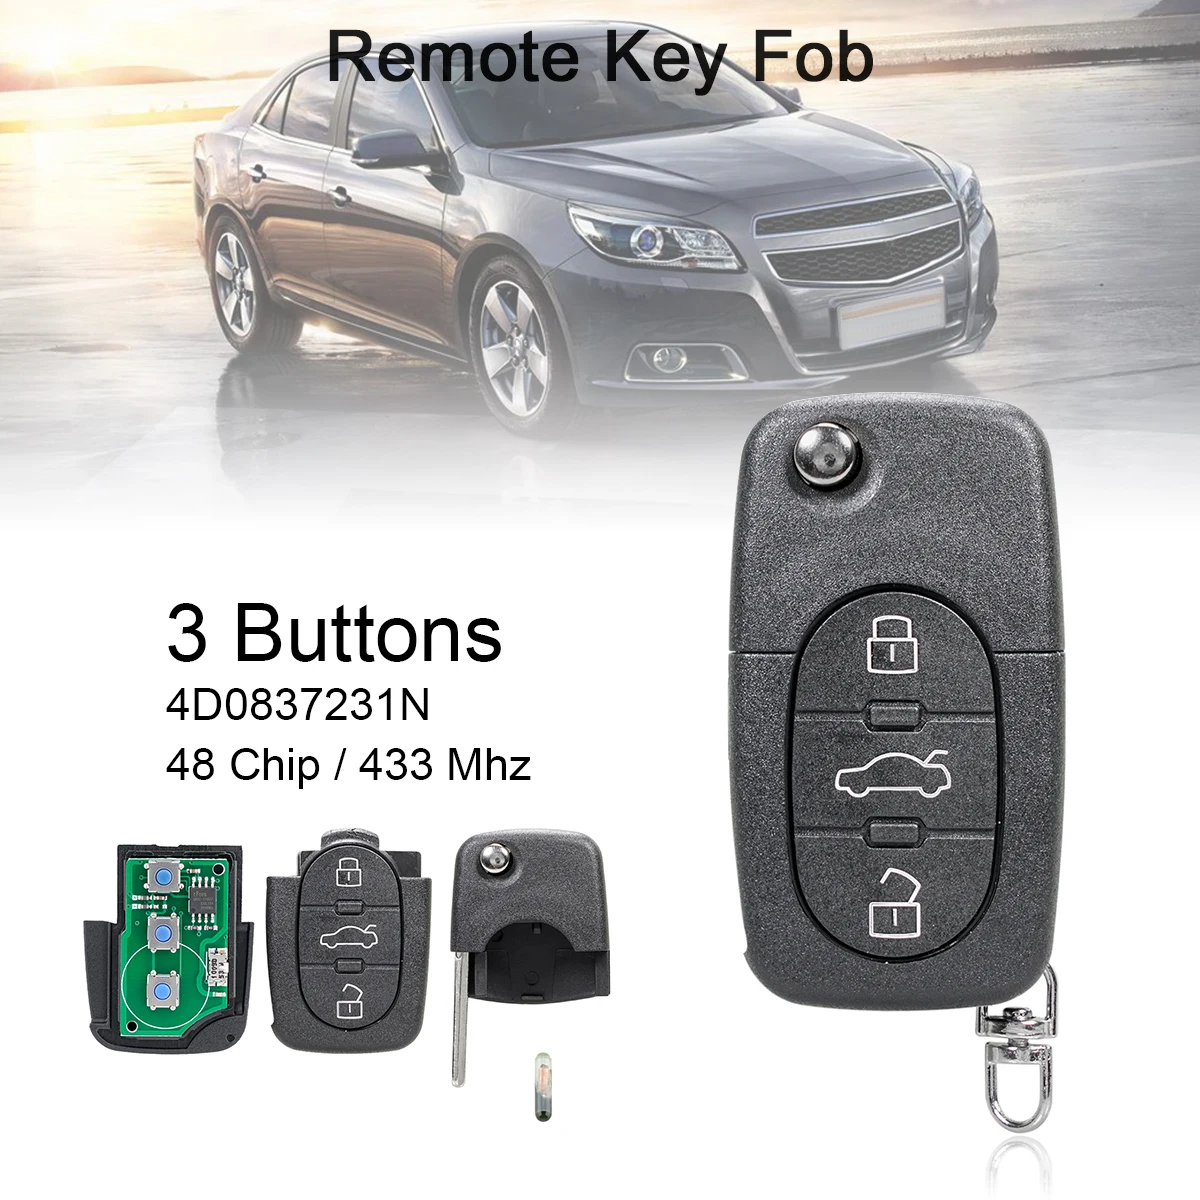 433MHh 3 Buttons Car Remote Key with ID48 Chip  4D0837231N for Audi- A2 A3 A4 A6 A8 TT 2002-2004 Keyless Entry Systems 433mhh 3 buttons car remote key with id48 chip 4d0837231n for audi a2 a3 a4 a6 a8 tt 2002 2004 keyless entry systems